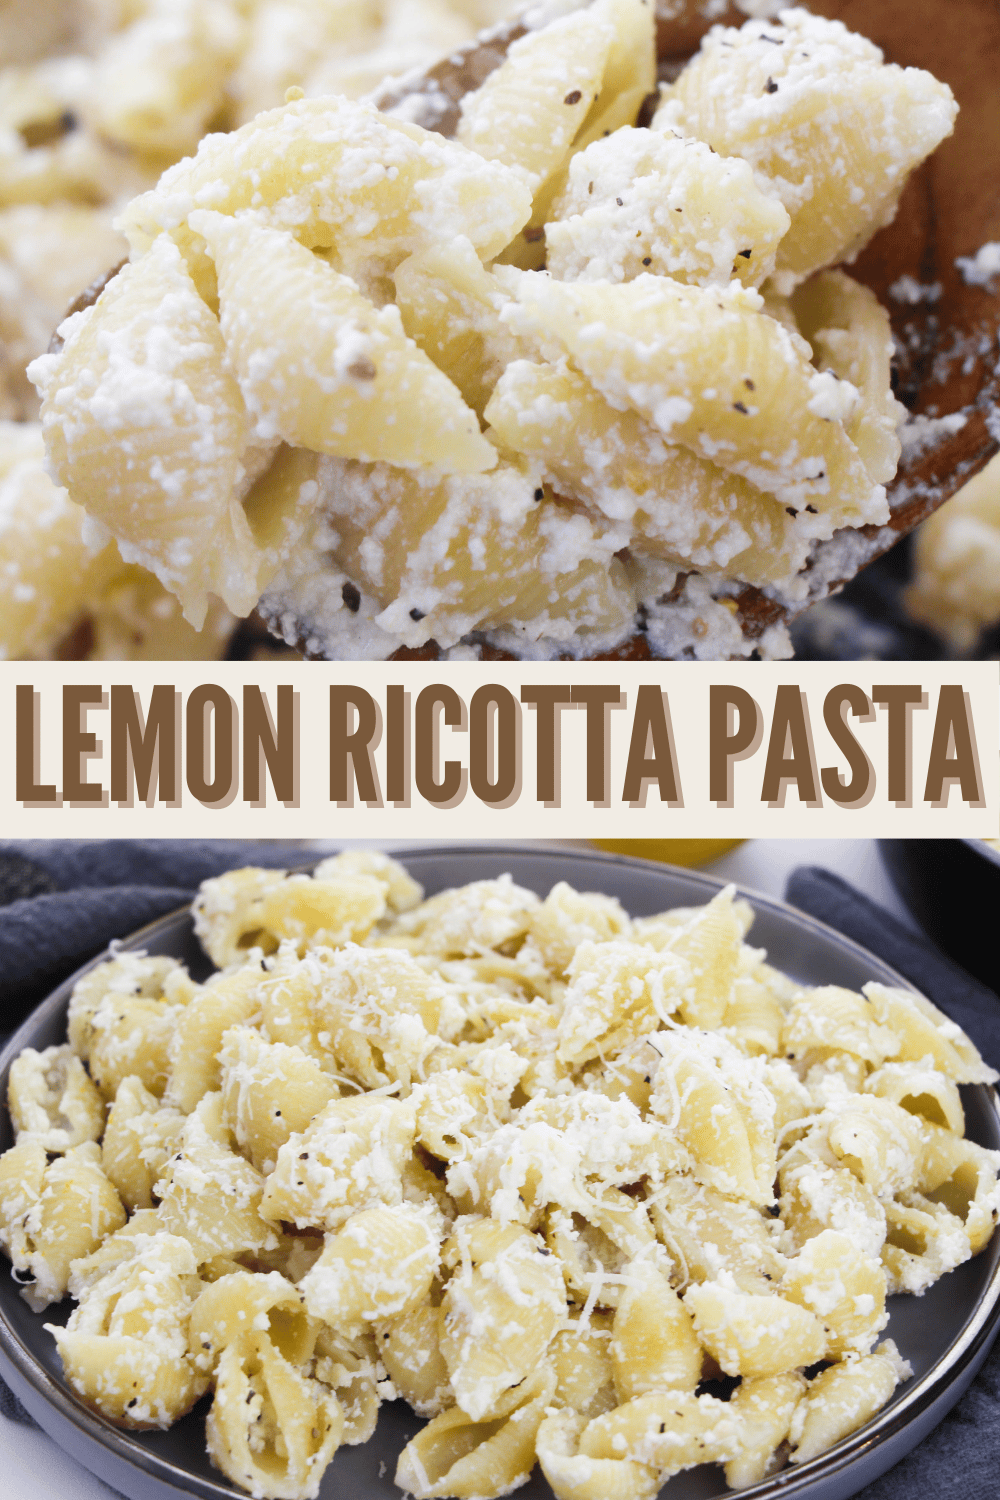 Lemon Ricotta Pasta is a light, refreshing dish perfect for summer. The lemon sauce adds flavor and the ricotta makes it creamy & delicious. #lemonricottapasta #lemon #ricotta #pasta #recipe via @wondermomwannab